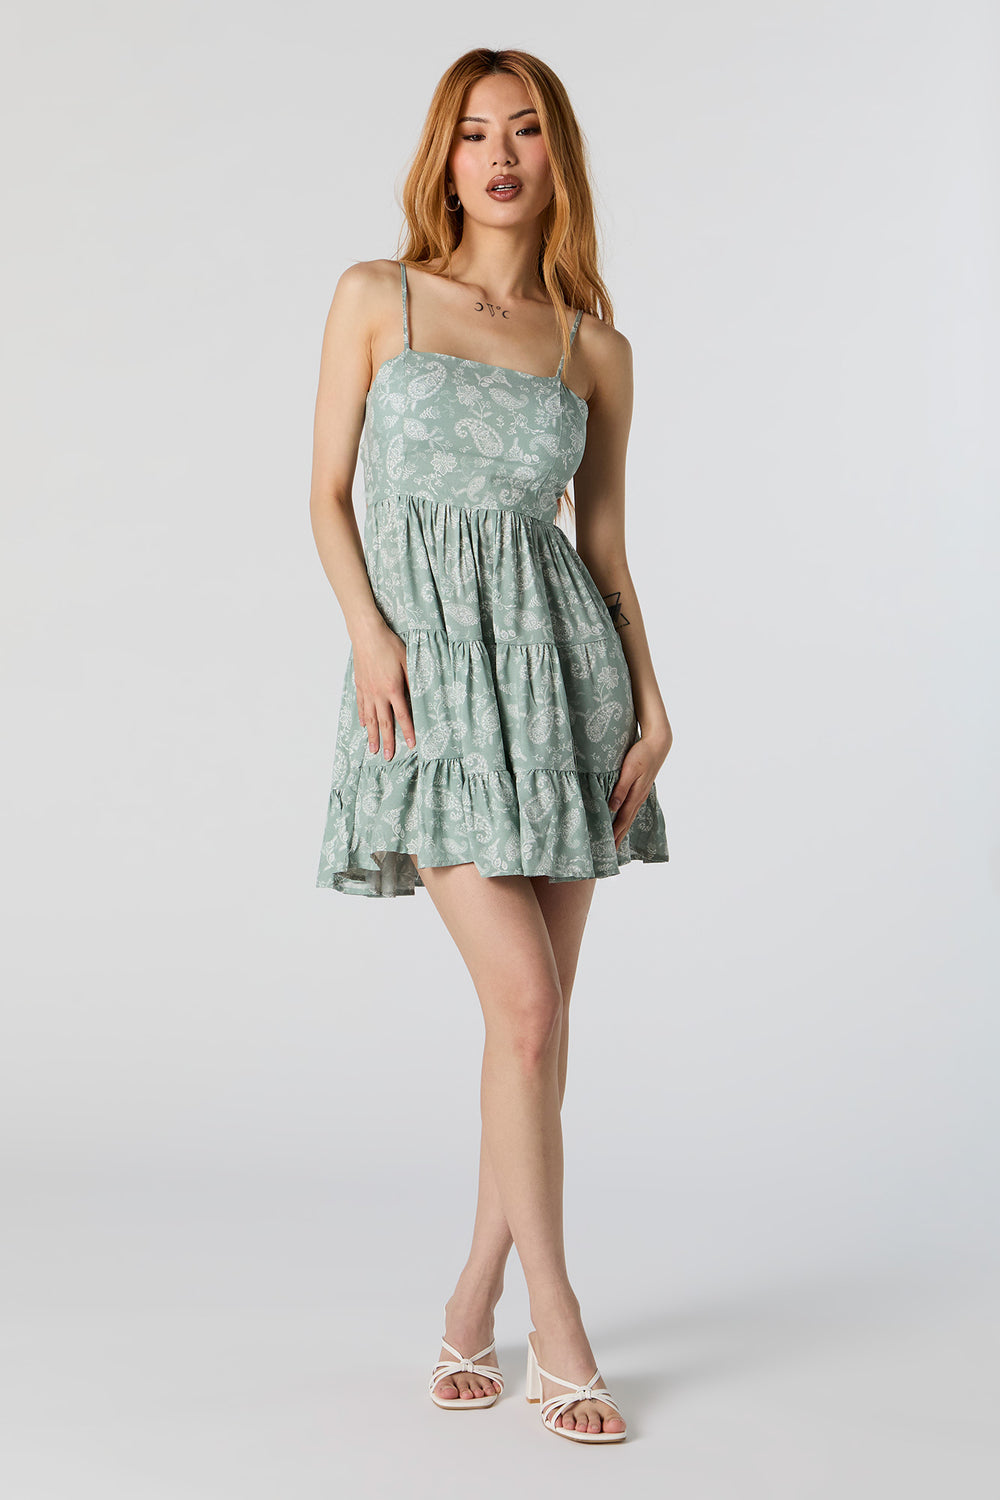 Green Floral Tiered Mini Dress with Built In Bra Cups Green Floral Tiered Mini Dress with Built In Bra Cups 3